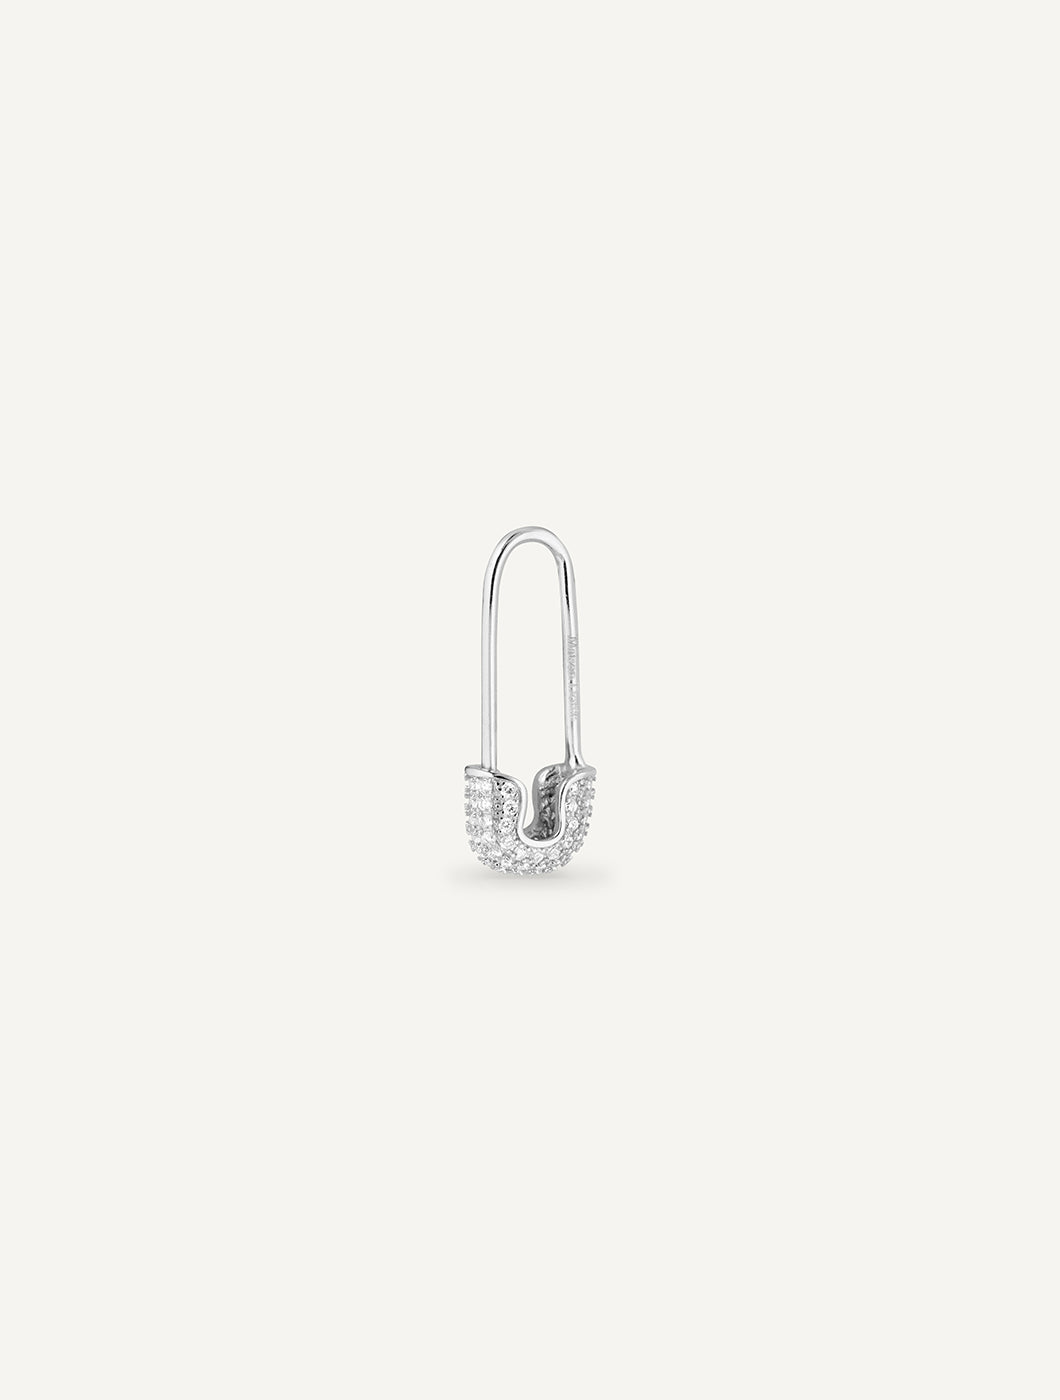 SAFETY PIN SINGLE EARRING